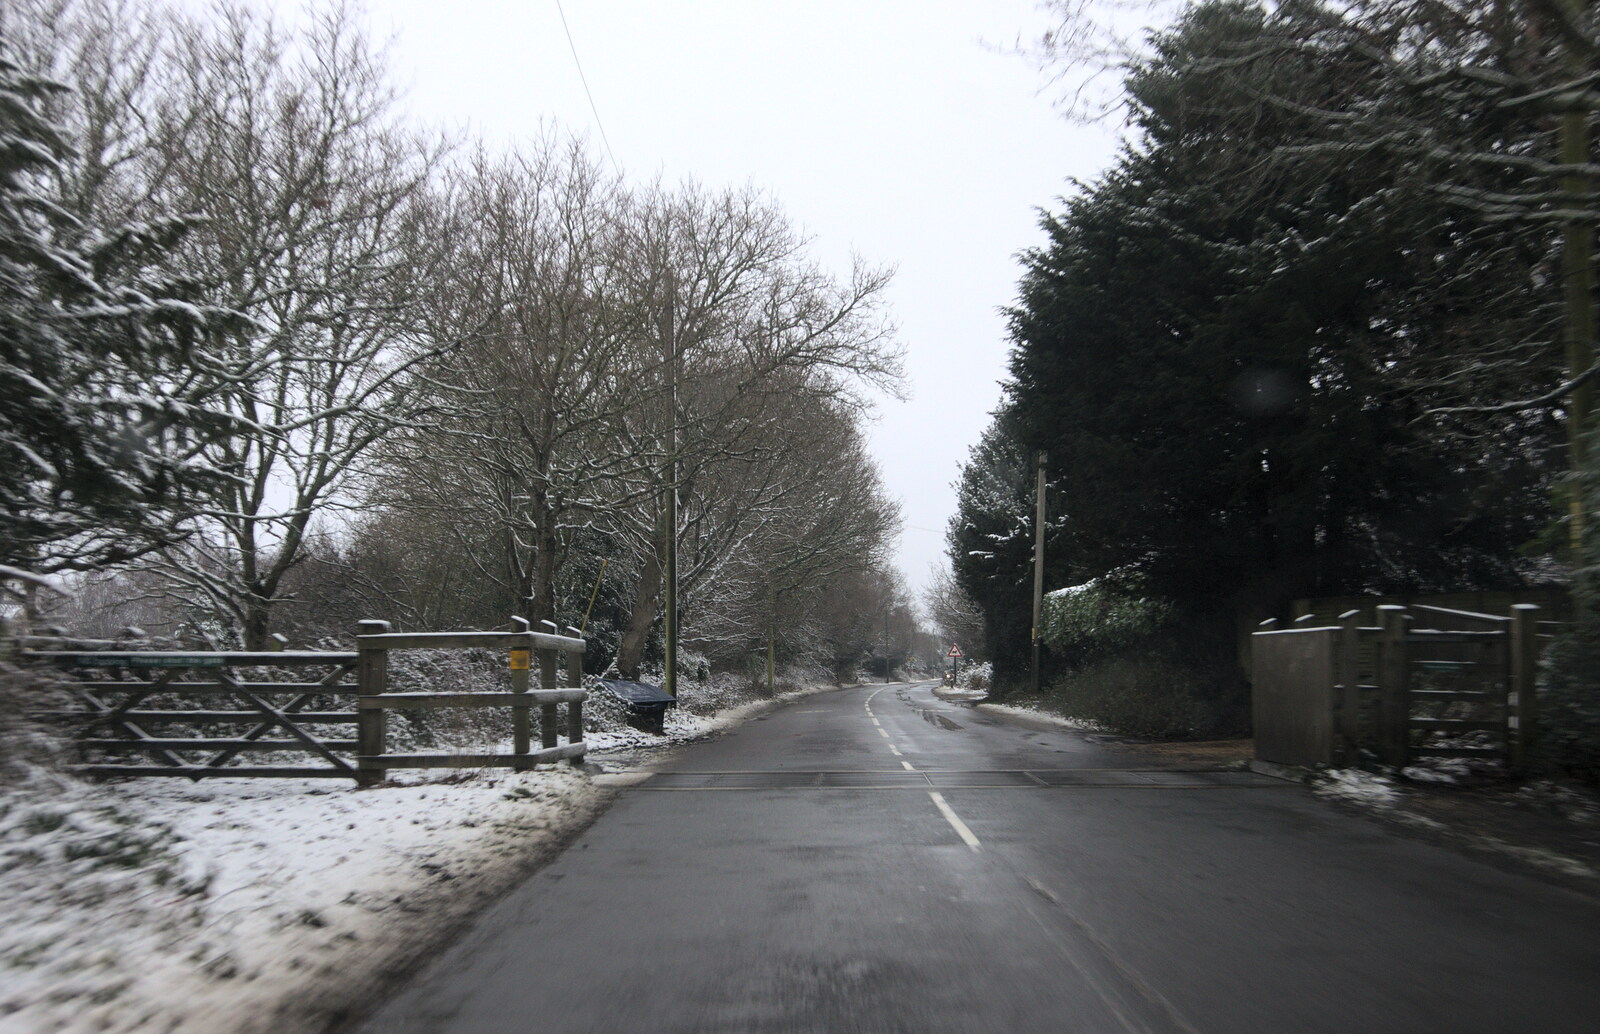 The road out of Bransgore from A Wintry Trip Down South, Walkford, Dorset - 1st February 2019